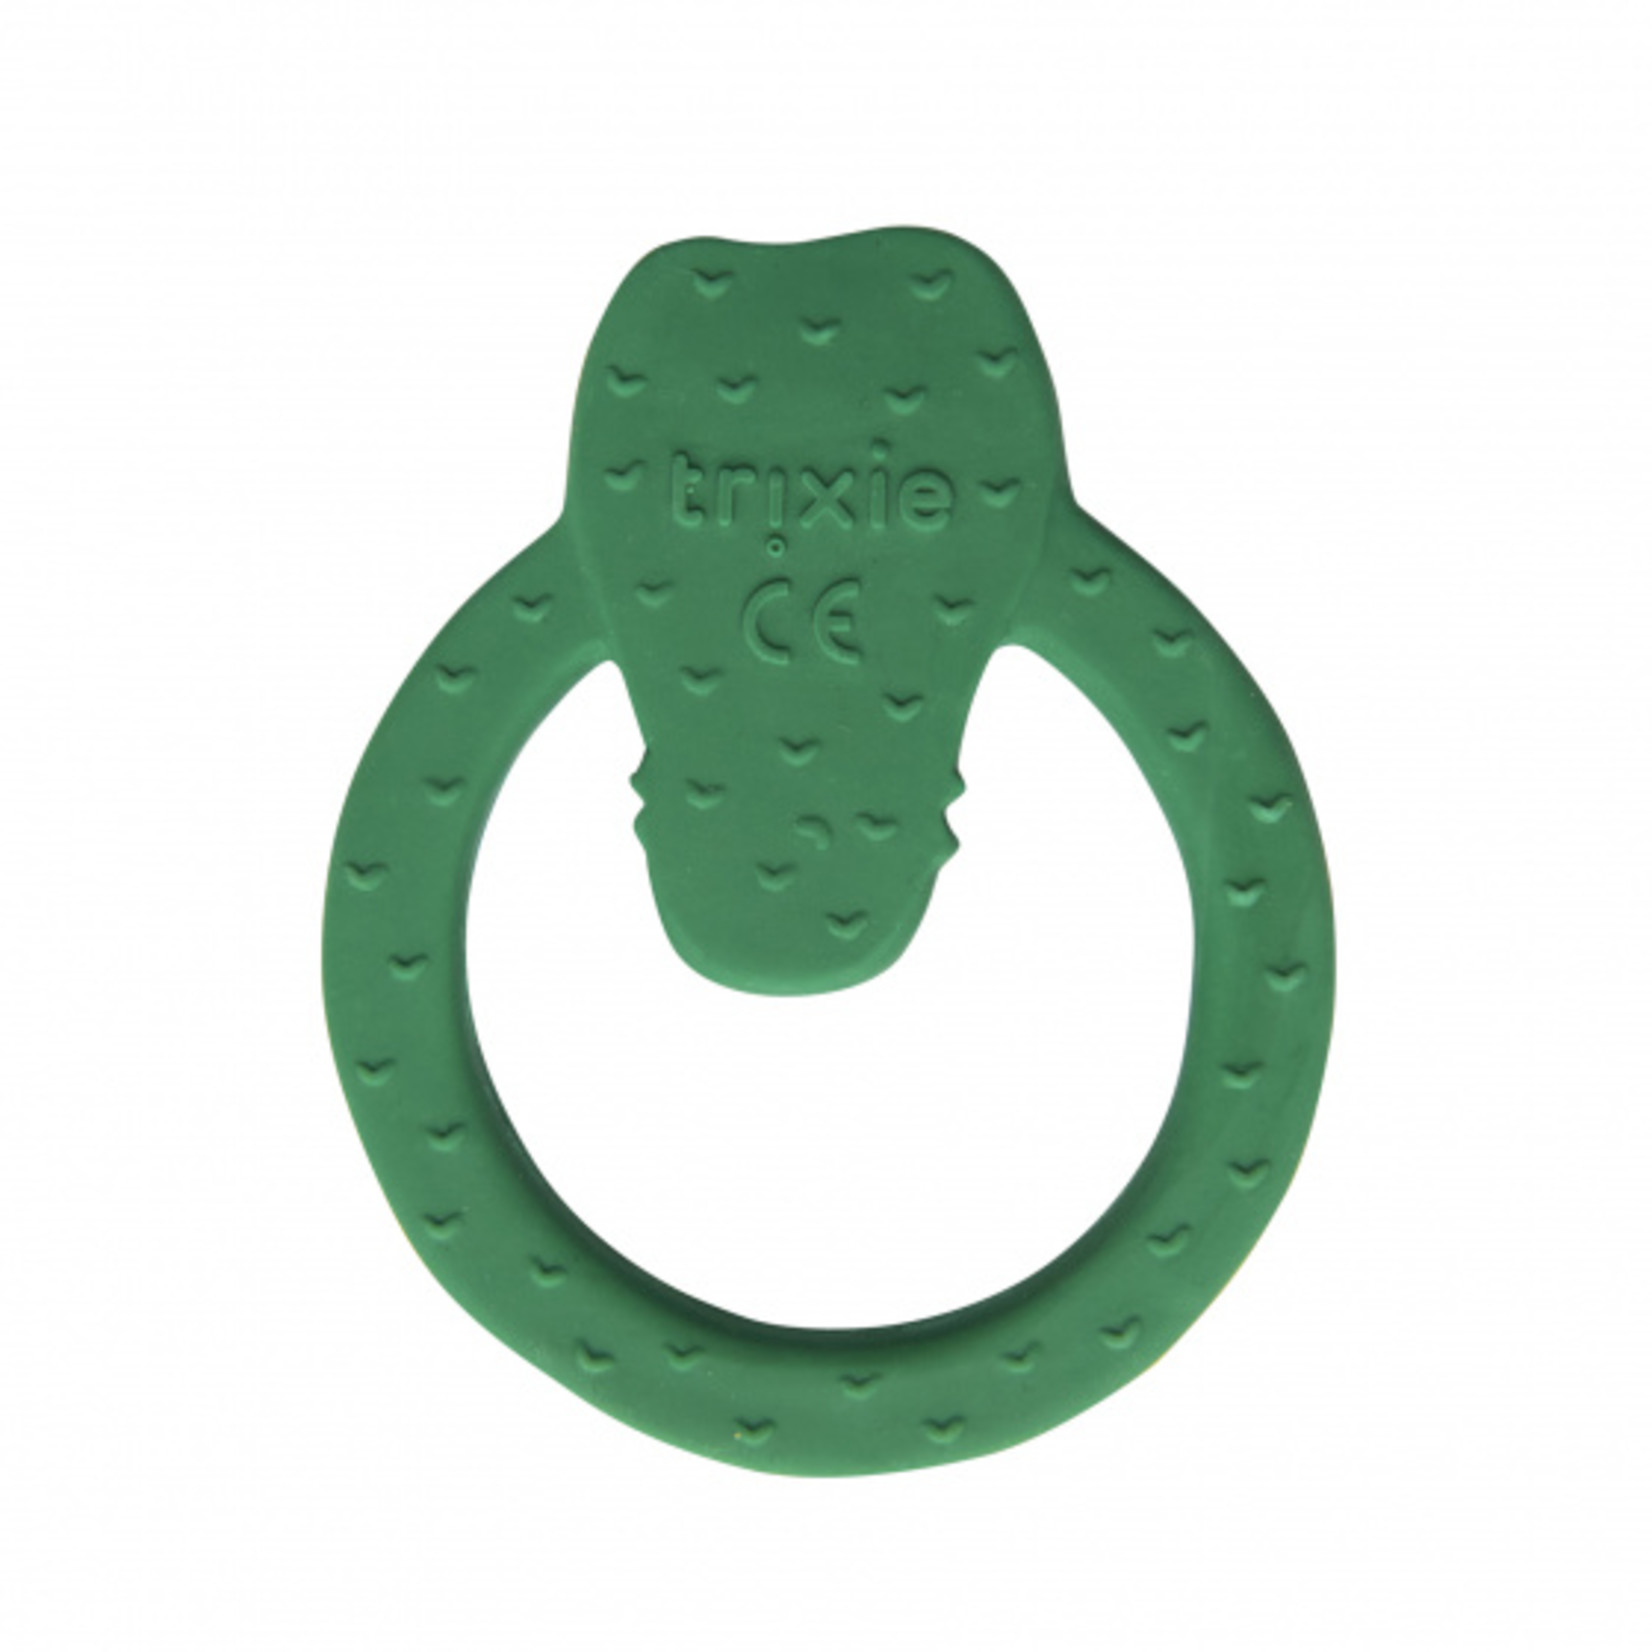 Trixie Natural rubber round teether-Mr. Crocodile